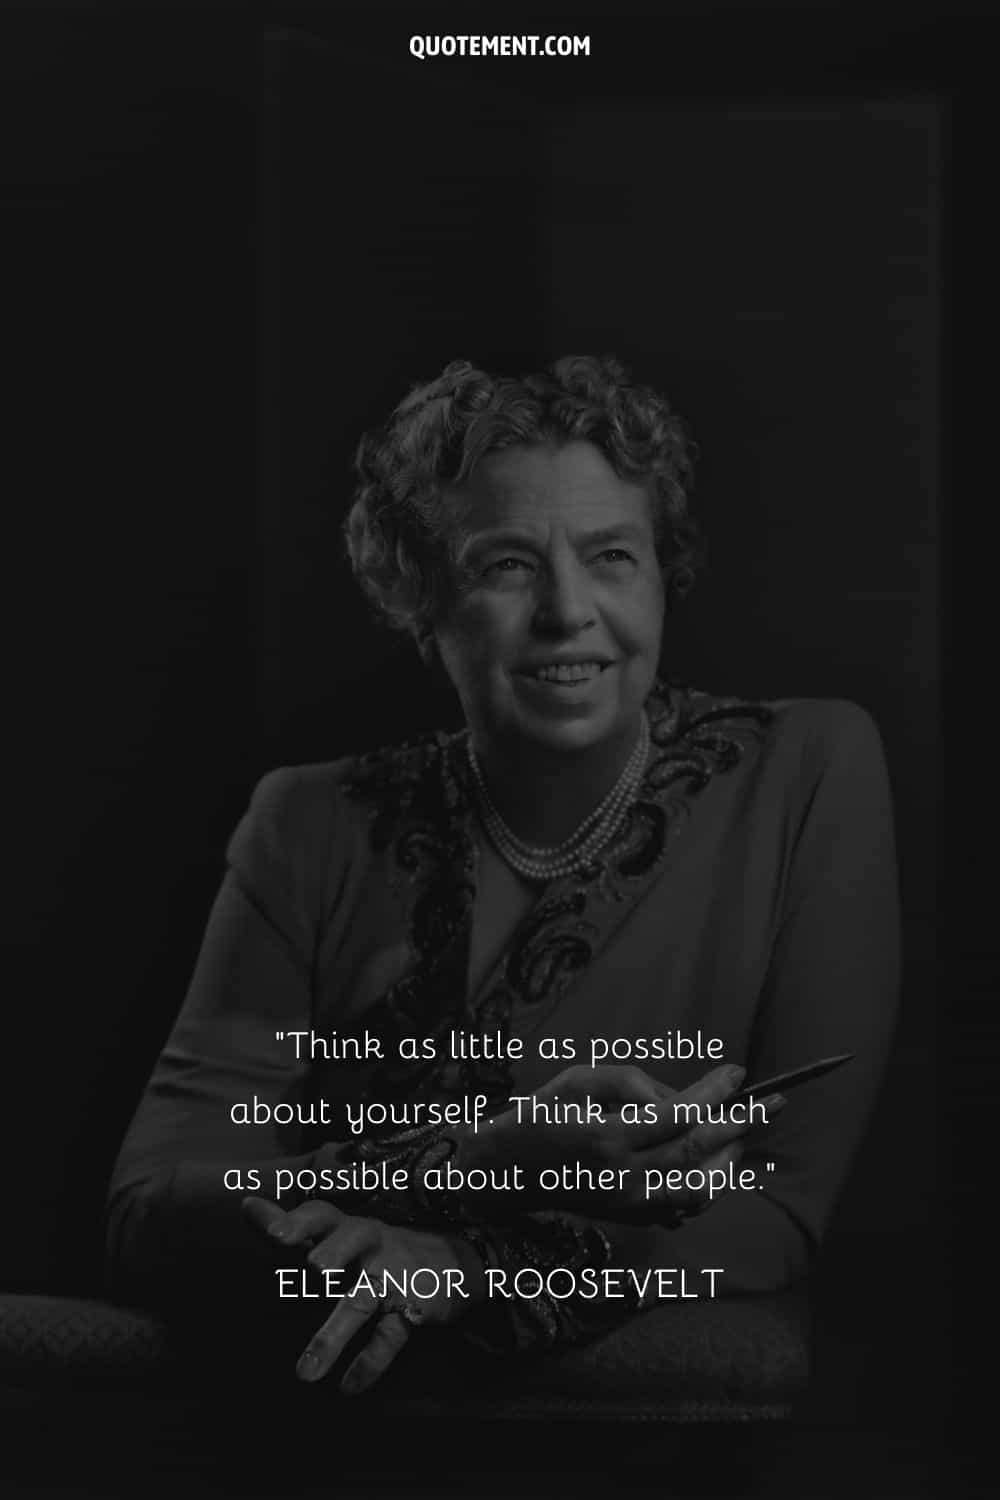 quote from eleanor roosevelt on a background with her picture